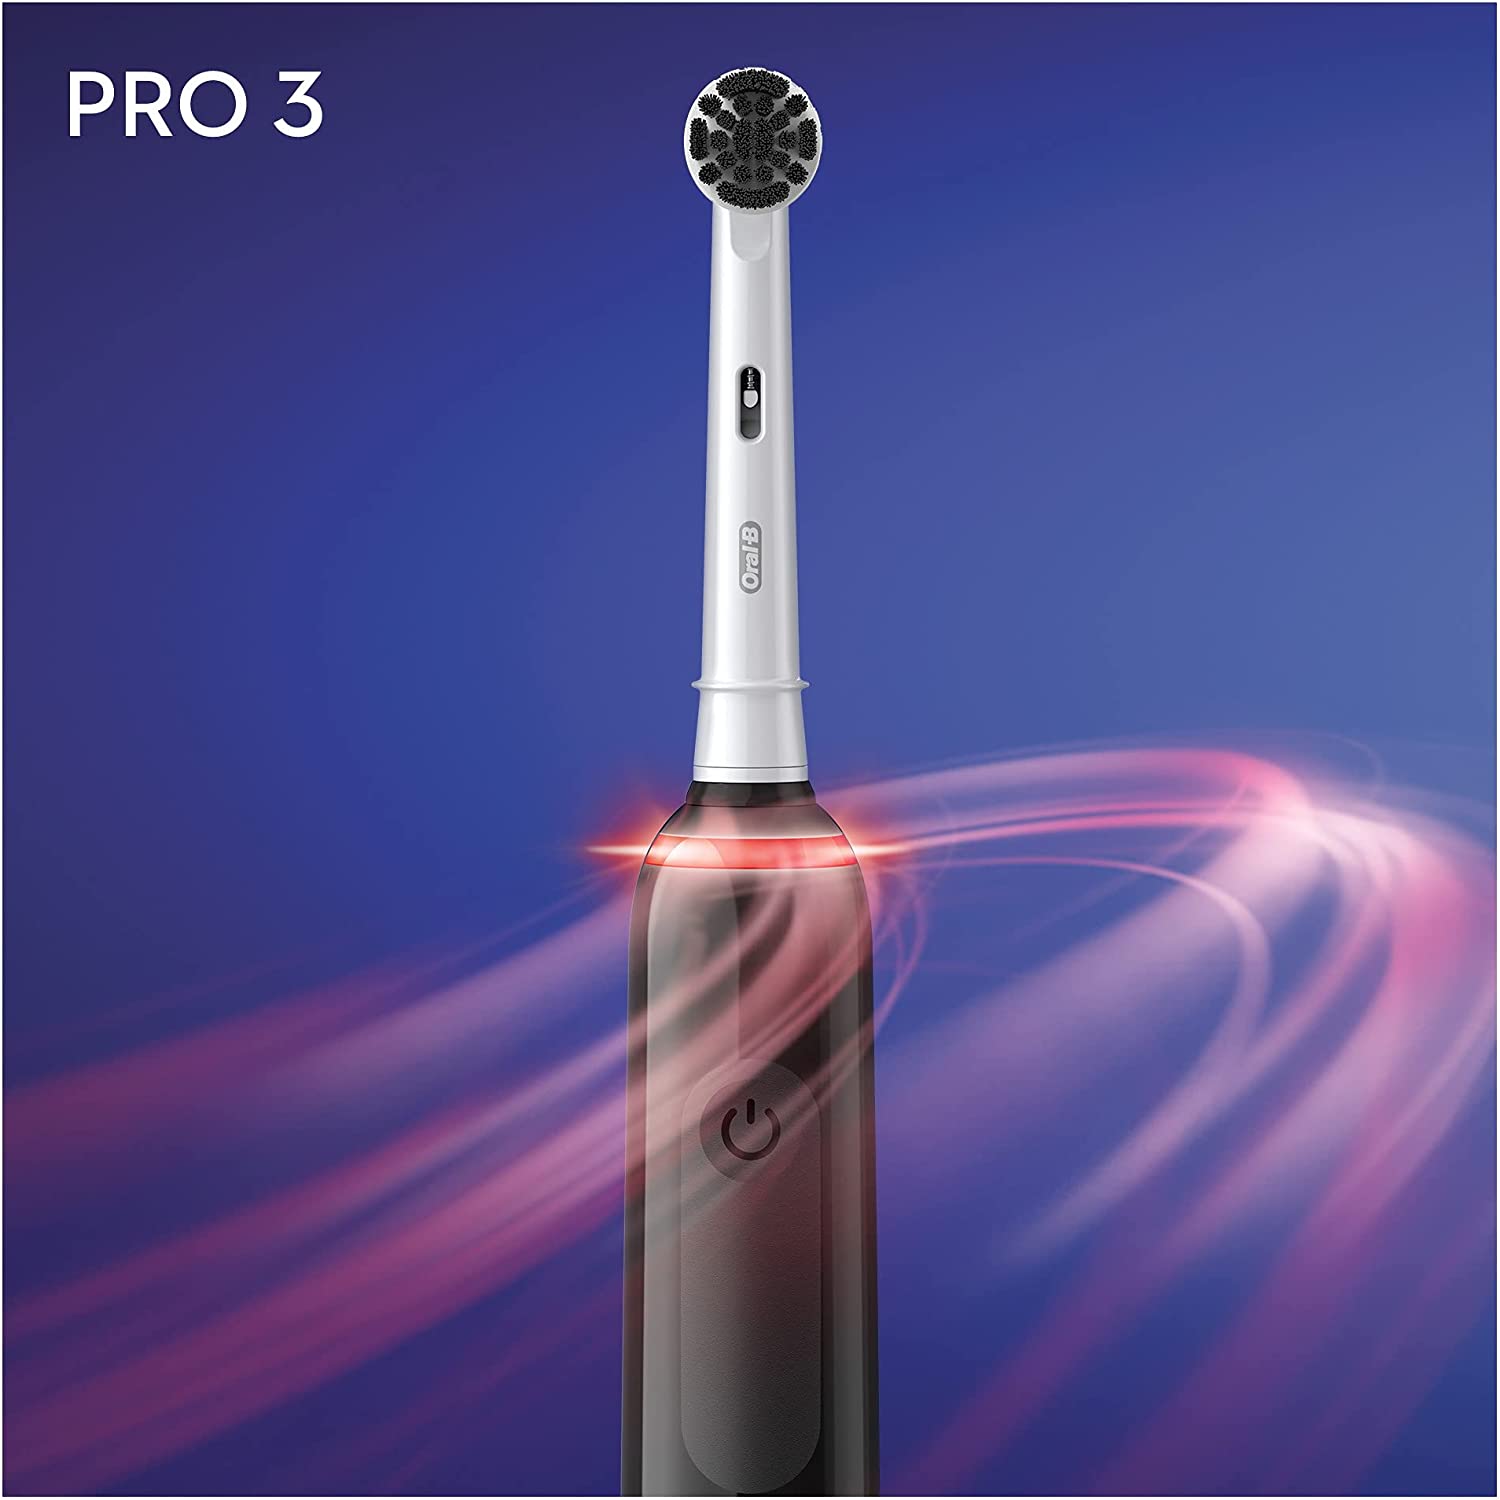 Oral-B Pro 3 - 3000 - Black Electric Toothbrush With Charcoal Infused Bristles - Healthxpress.ie